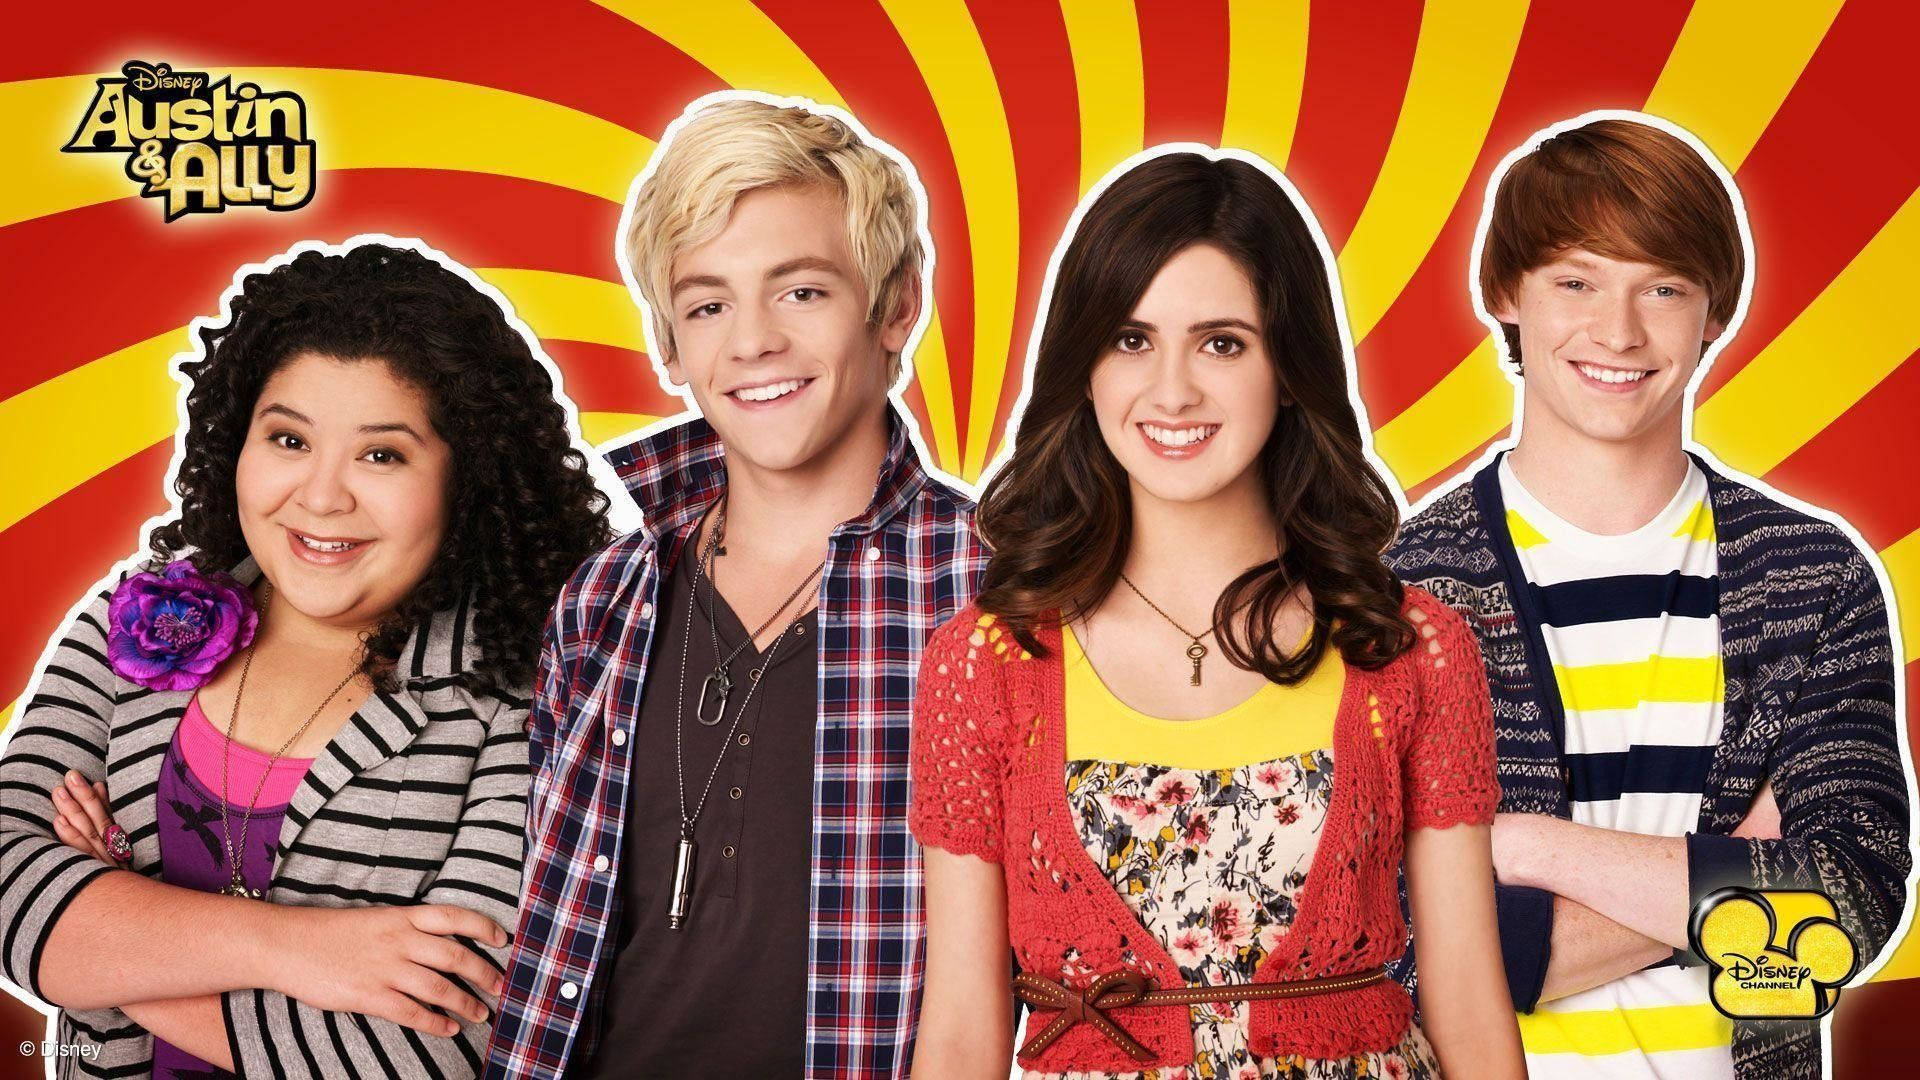 Disney Channel Austin And Ally Show Background